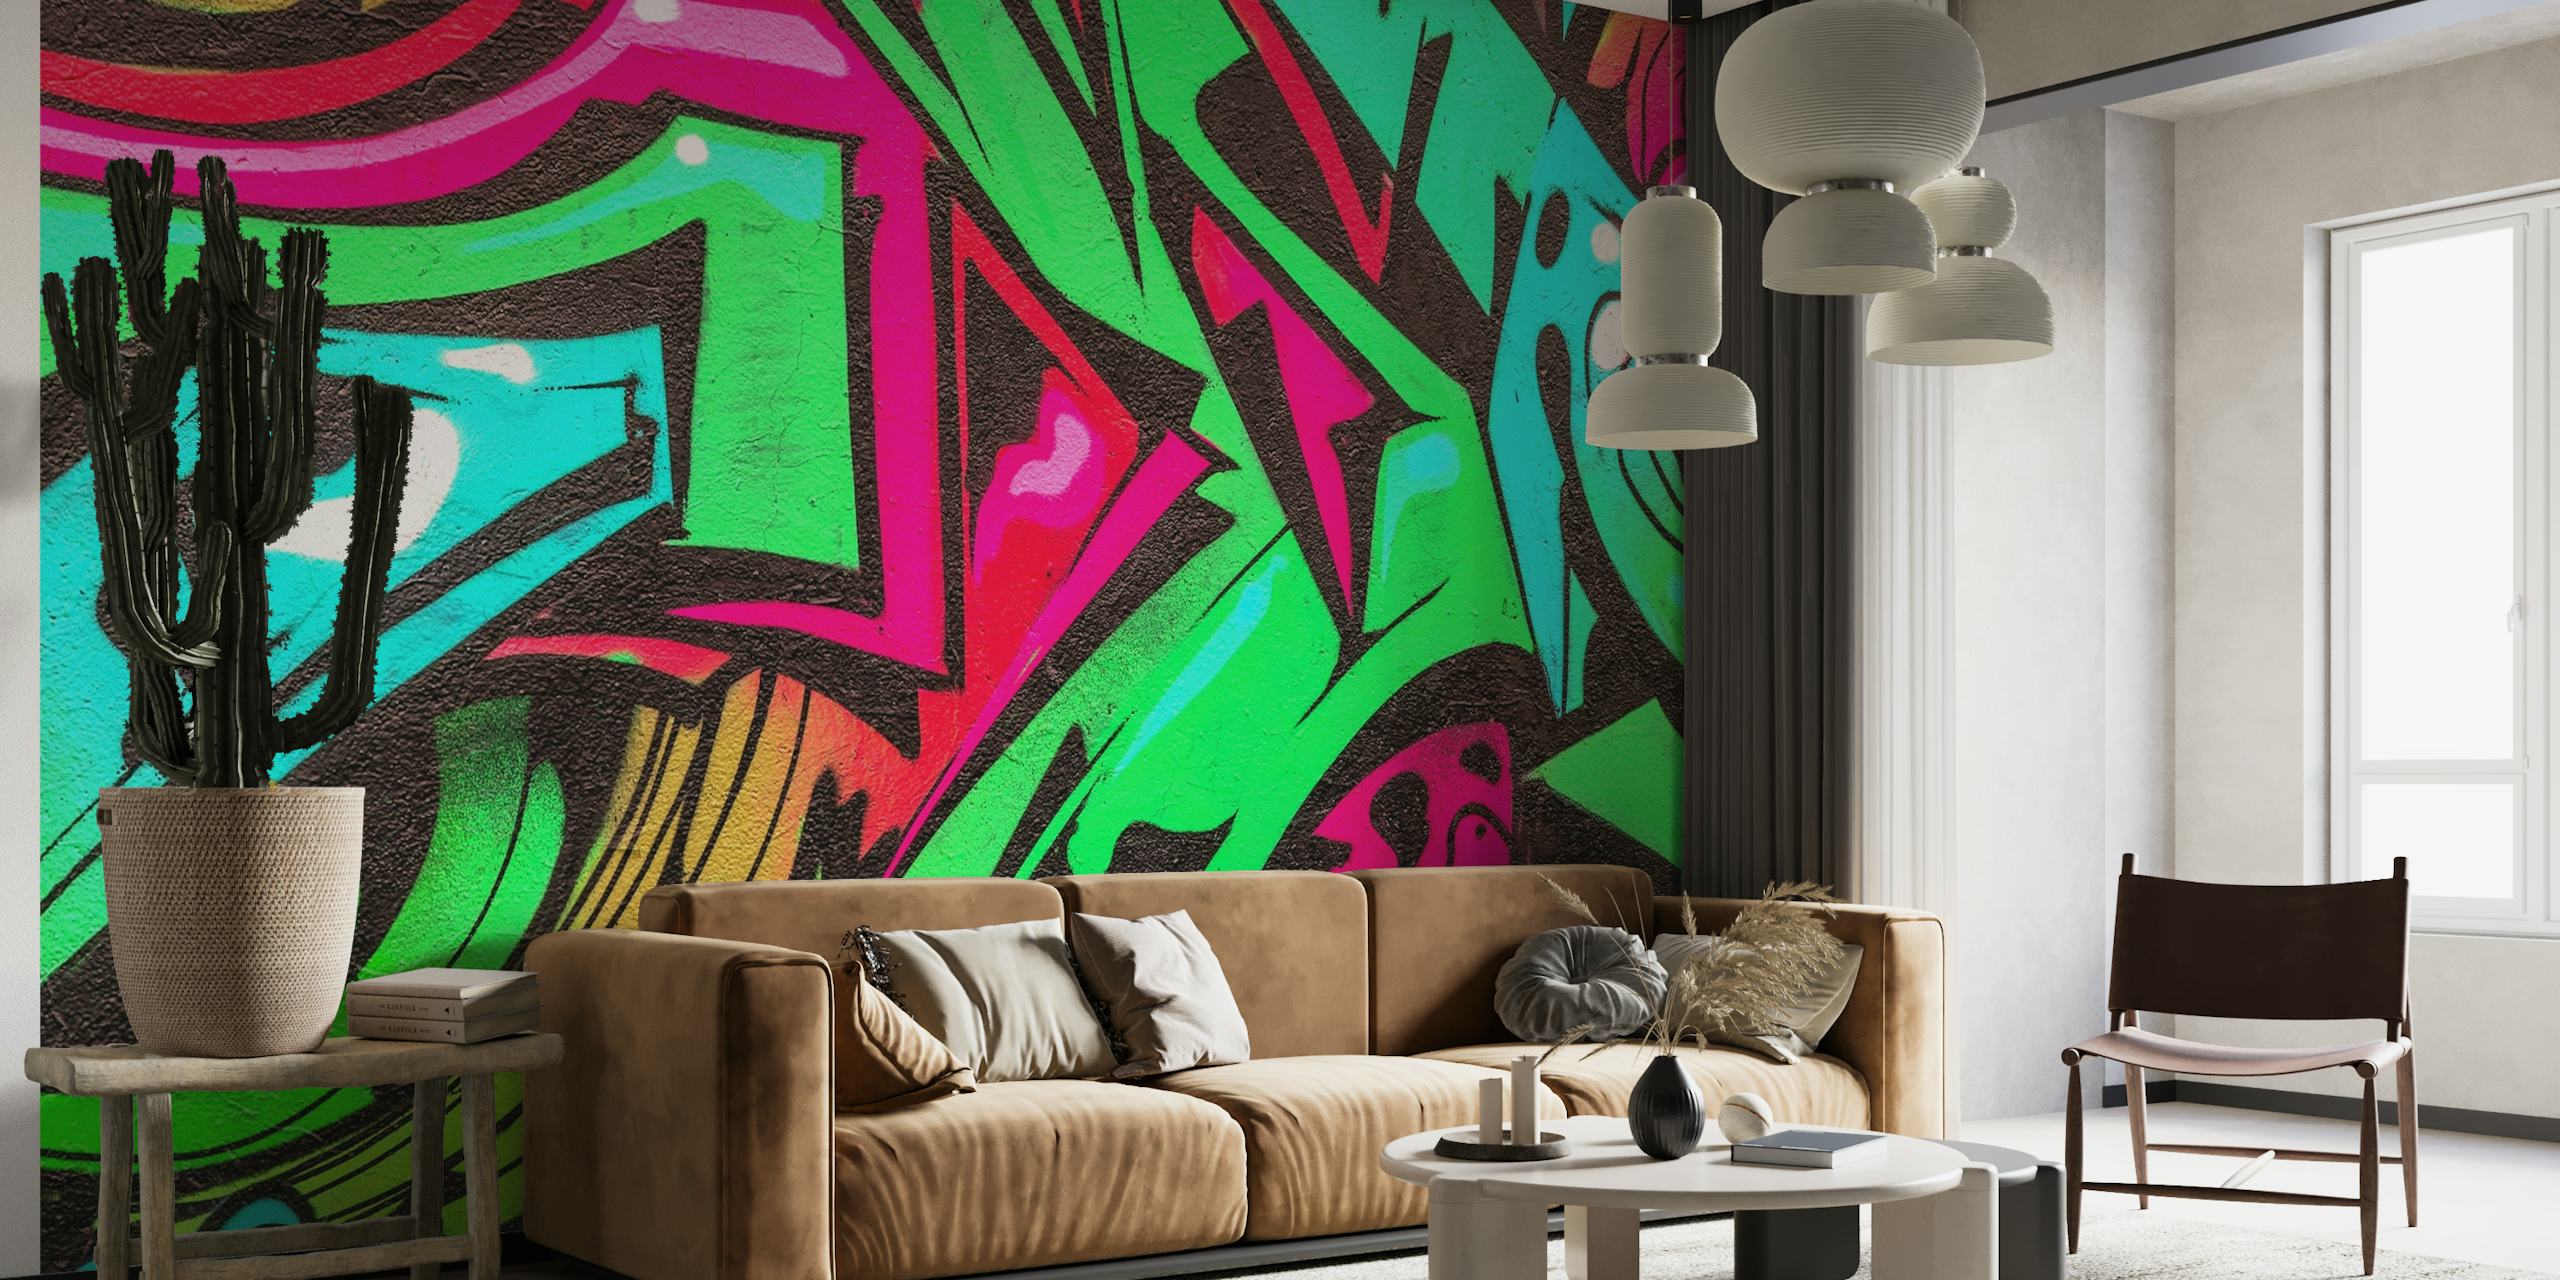 Colorful graffiti wall mural with vibrant shades of green, pink, and turquoise